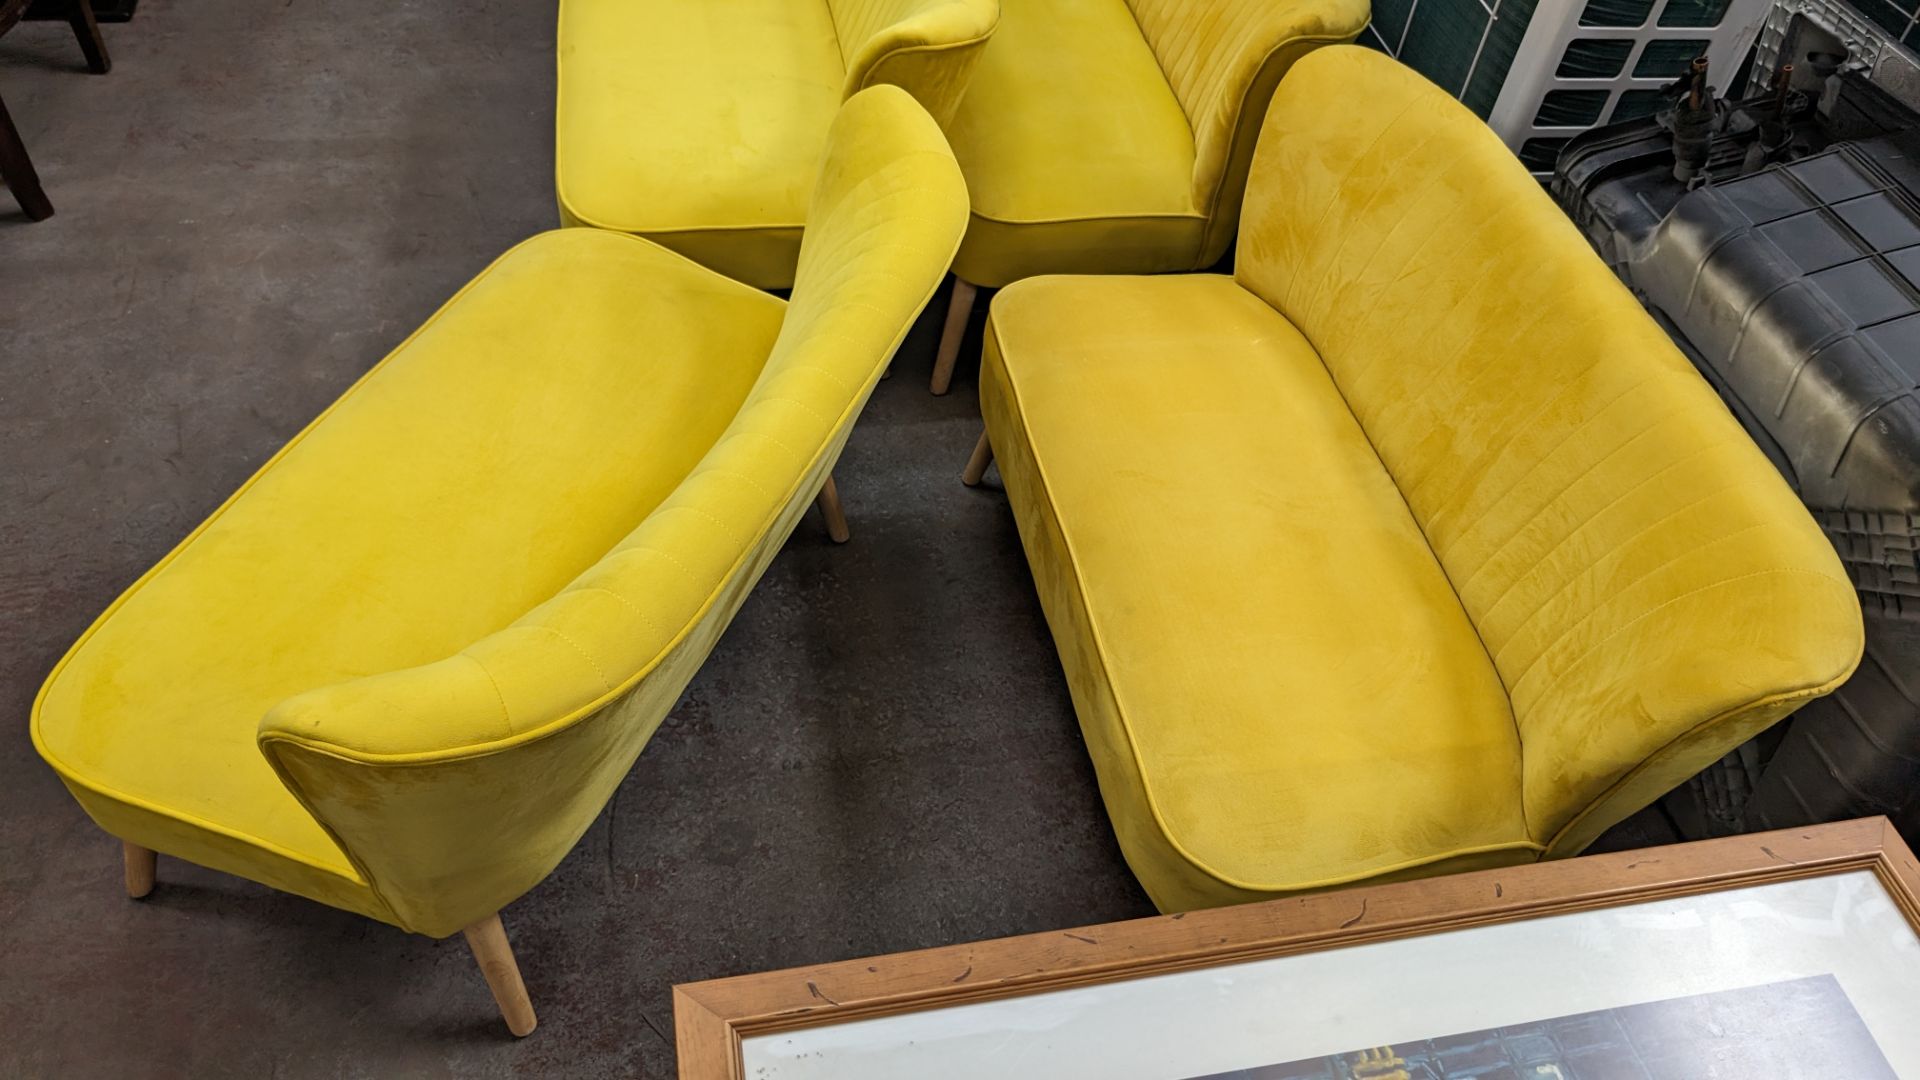 Pair of mustard yellow velour two-person small sofas, each measuring approximately 1120mm wide - Image 6 of 6